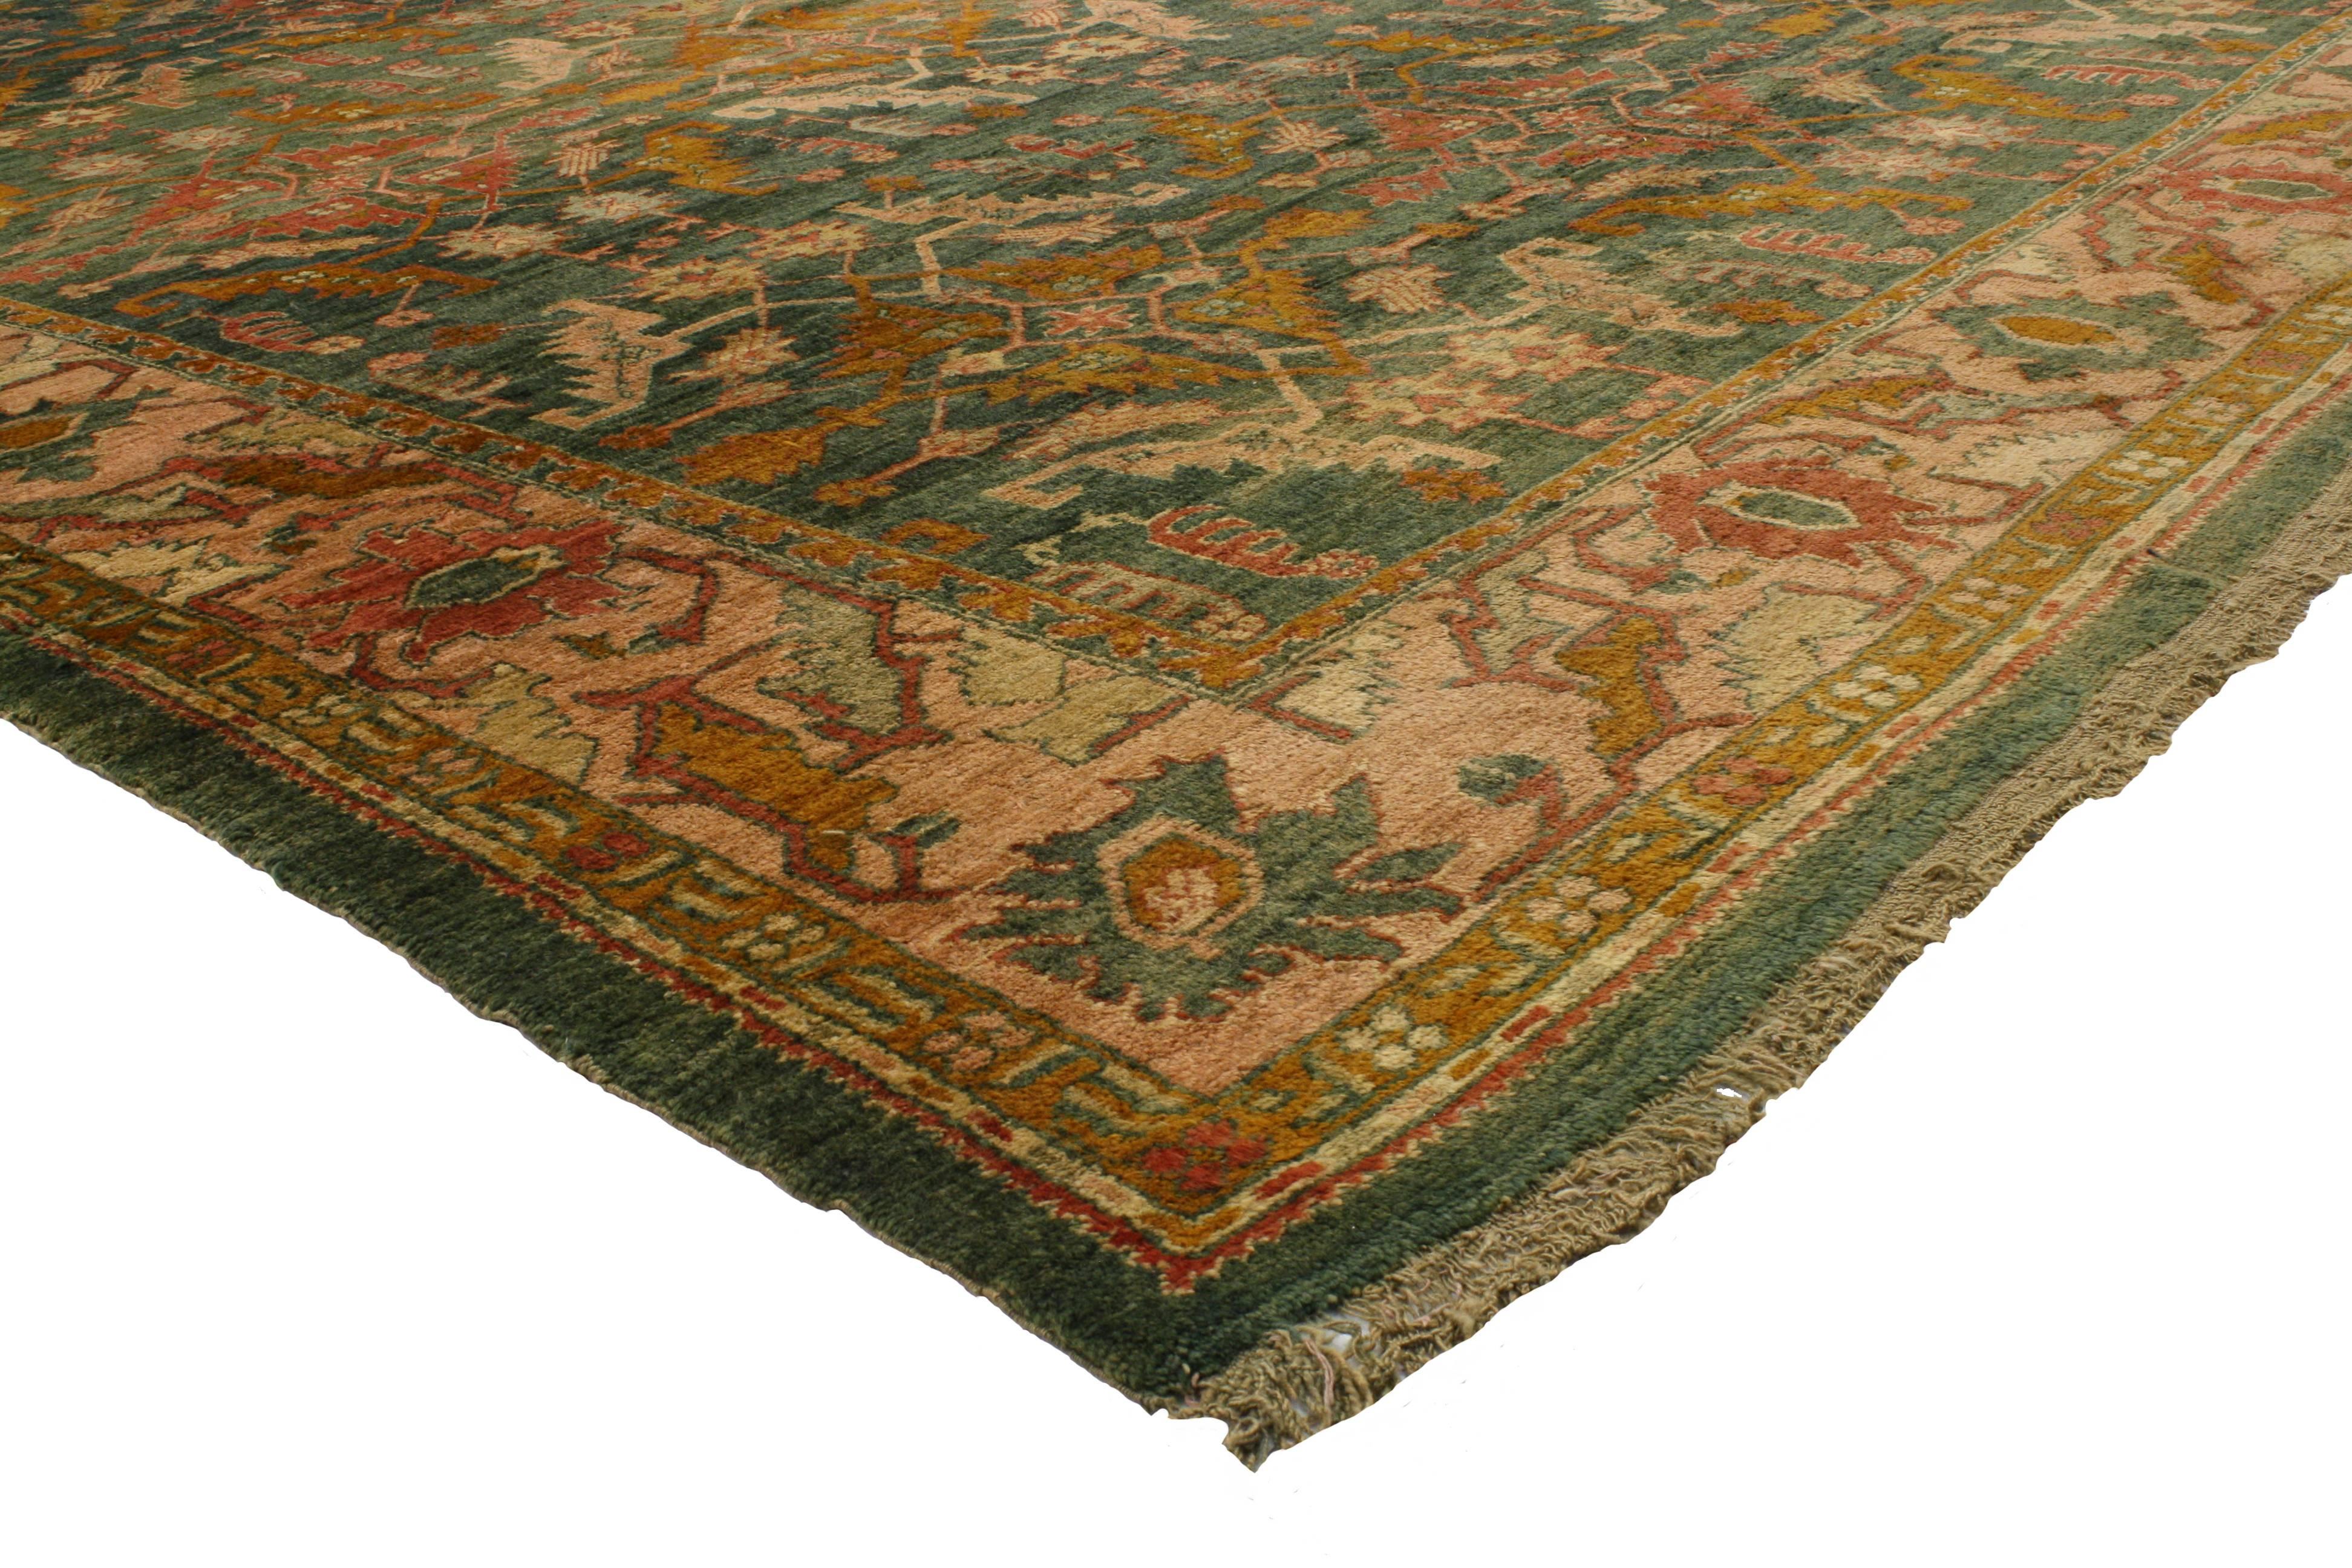 Surreal shades of green, salmon and warm golden saffron yellow characterize this ethereal antique Turkish Oushak rug. Featuring a large scale all-over pattern embellished with serrated geometric motifs, the astounding complexity and sincere beauty